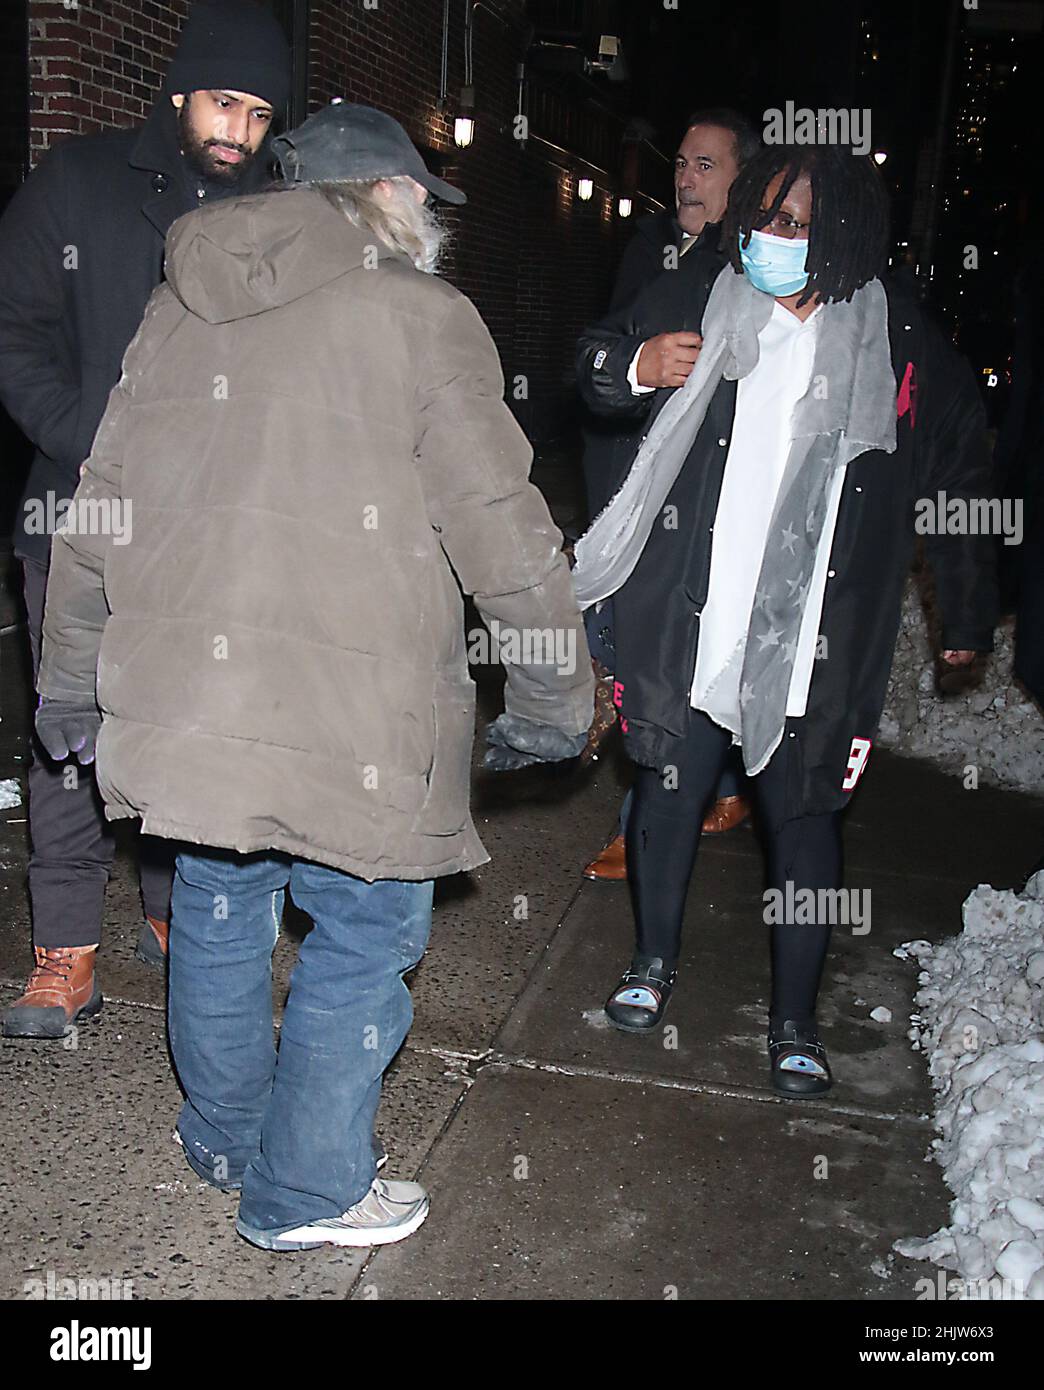 New York, NY, USA. 31st Jan, 2022. Whoopi Goldberg seen greeting Radio Man  after exiting The Late Show With Stephen Colbert promoting the 2nd season  of Star Trek: Picard on January 31,